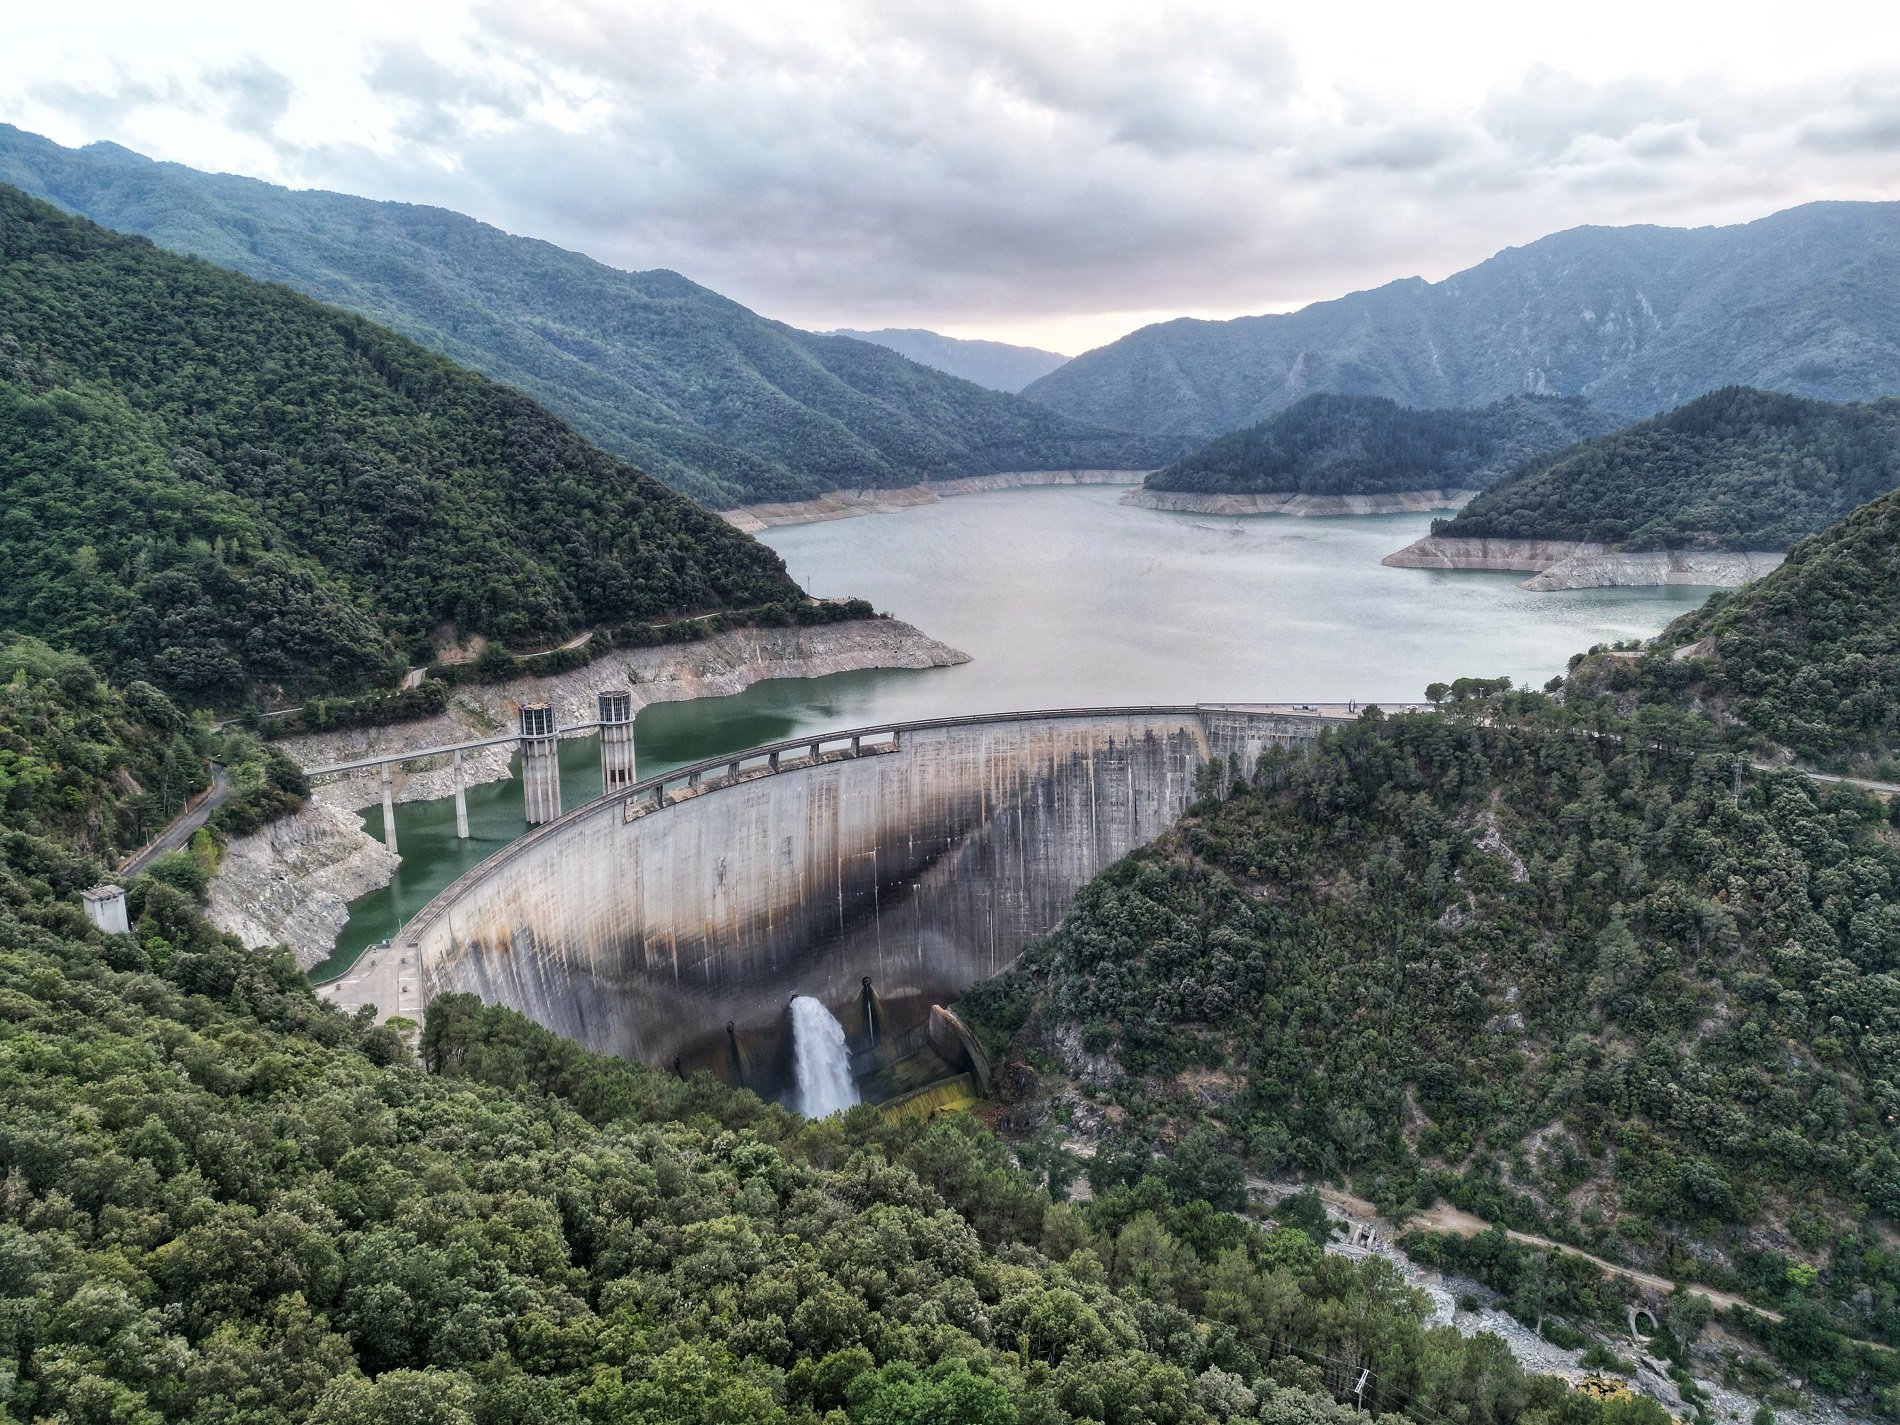 Drought alert in Catalonia: 279 municipalities affected by water restrictions